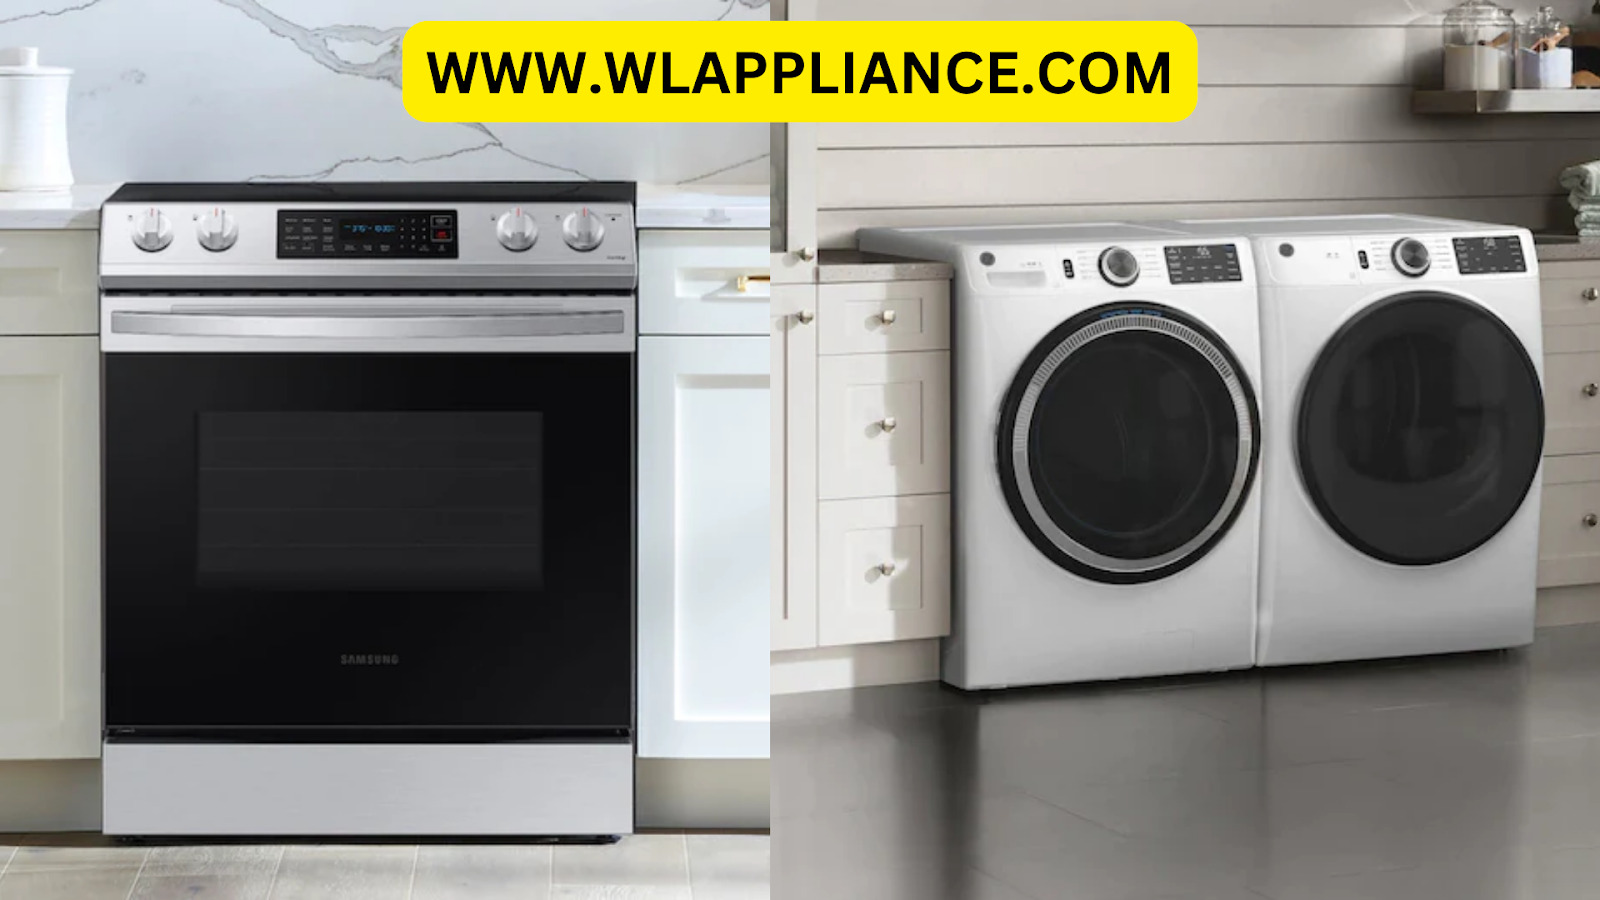 Repair Services Specialised in Dryers Offered in Melbourne, Florida